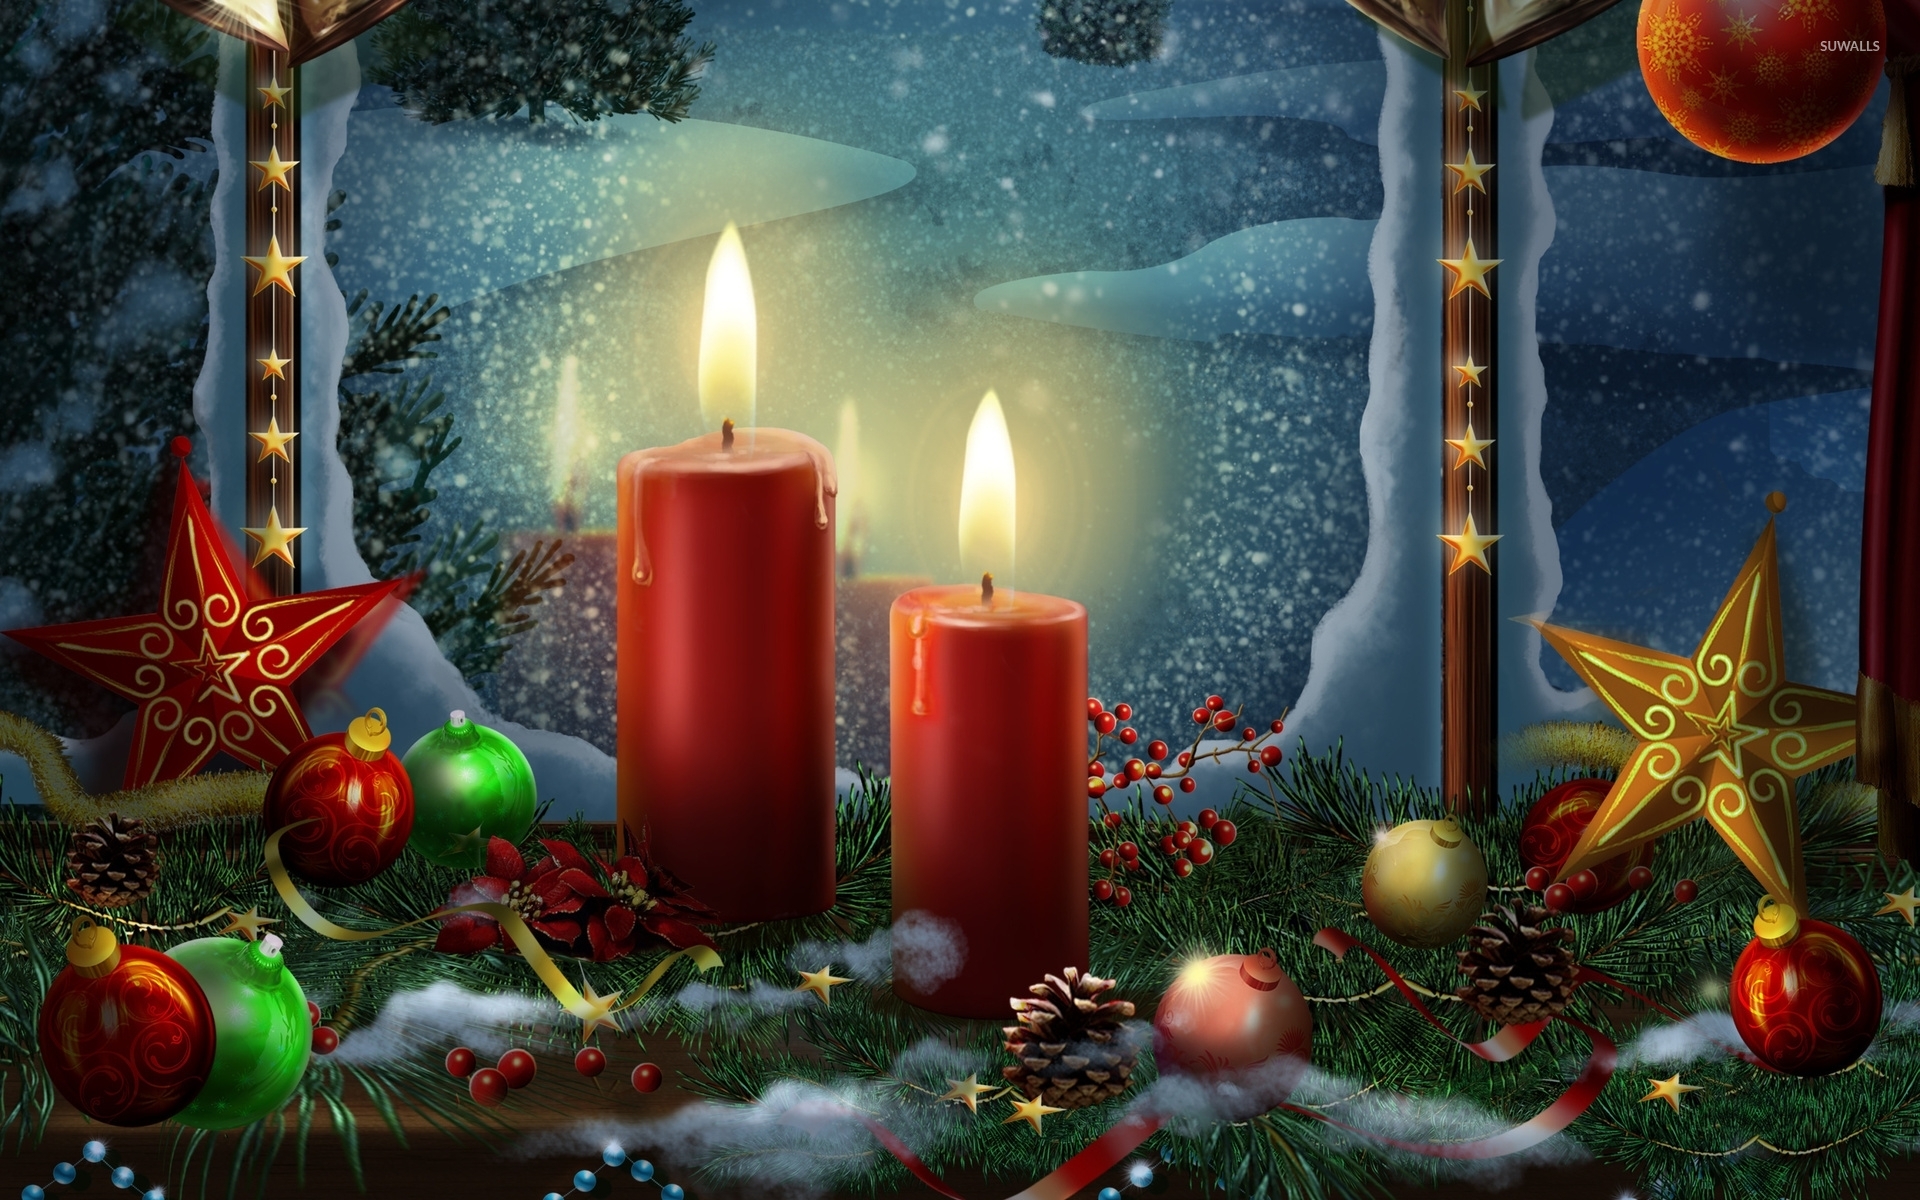 Christmas decoration in the window wallpaper - Holiday wallpapers - #50384